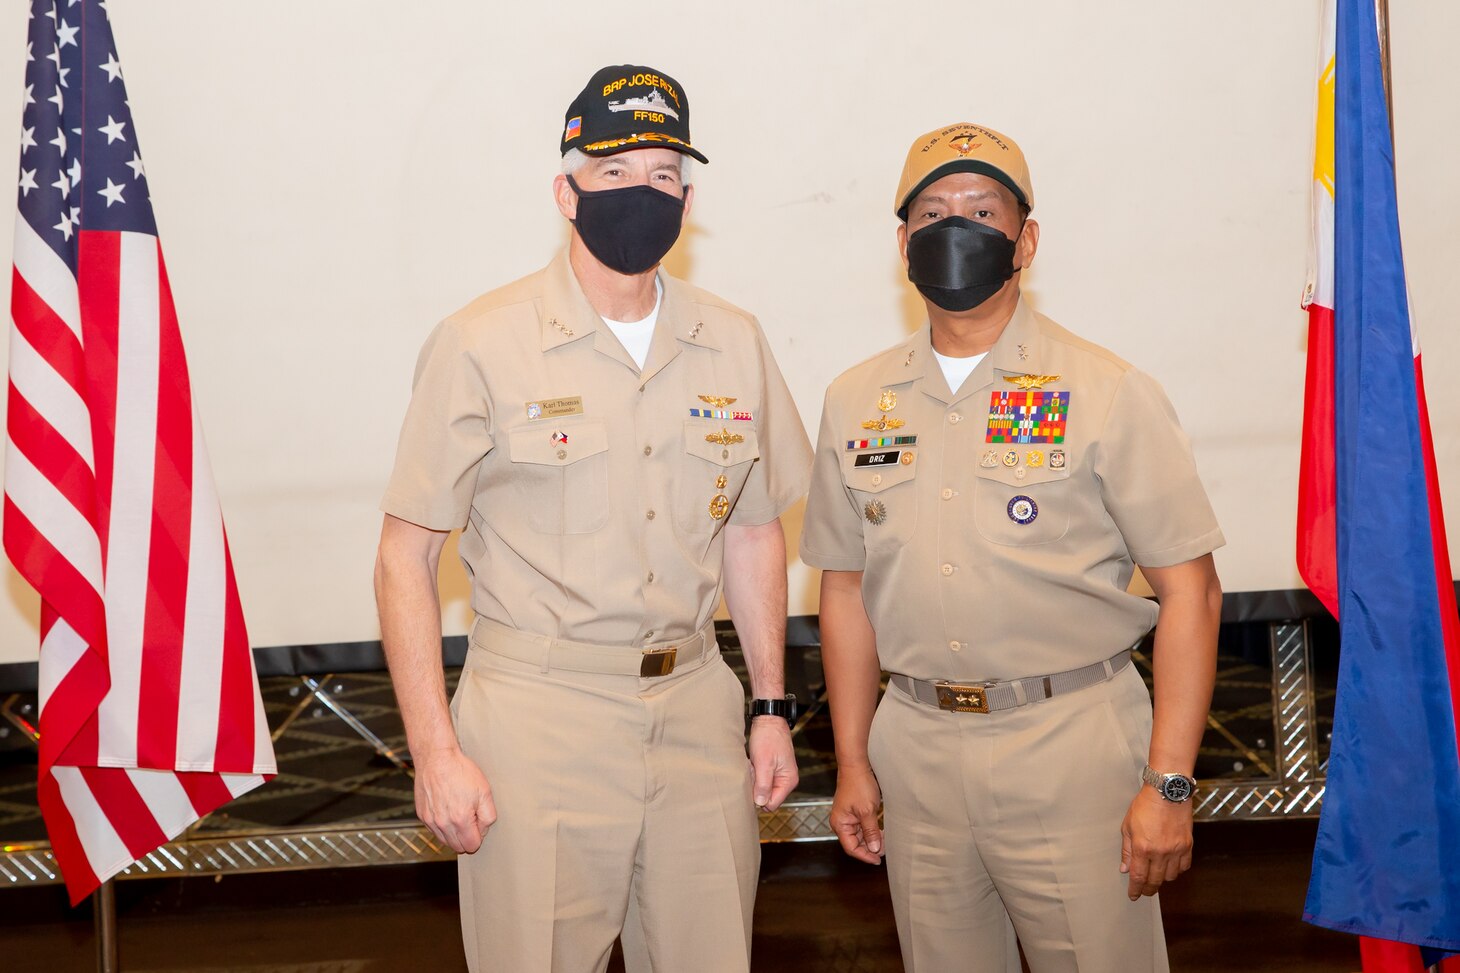 MANILLA, Philippines (Feb. 22, 2022) Vice Adm. Karl Thomas, commander, U.S. 7th Fleet, left, poses for a photo with Rear Adm. Nichols Driz, Philippine Navy fleet commander, during a recent trip to Manila for U.S. 7th Fleet-Philippine Fleet Staff Talks 2022, Feb. 22. (Photo courtesy of U.S. Embassy in the Philippines Public Affairs)